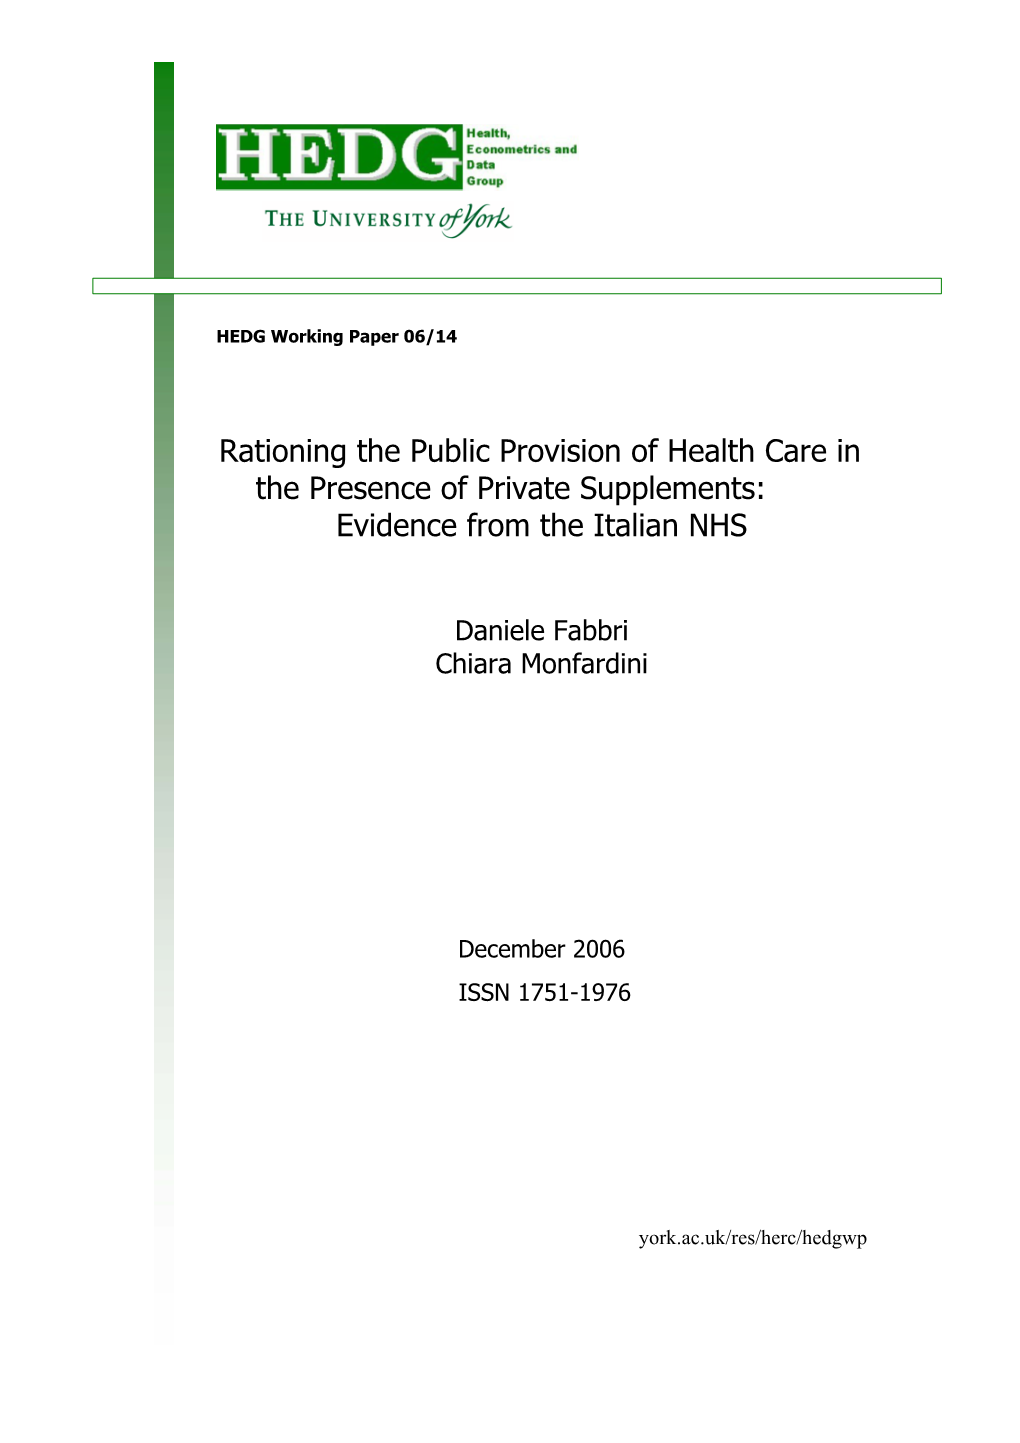 Evidence from the Italian NHS